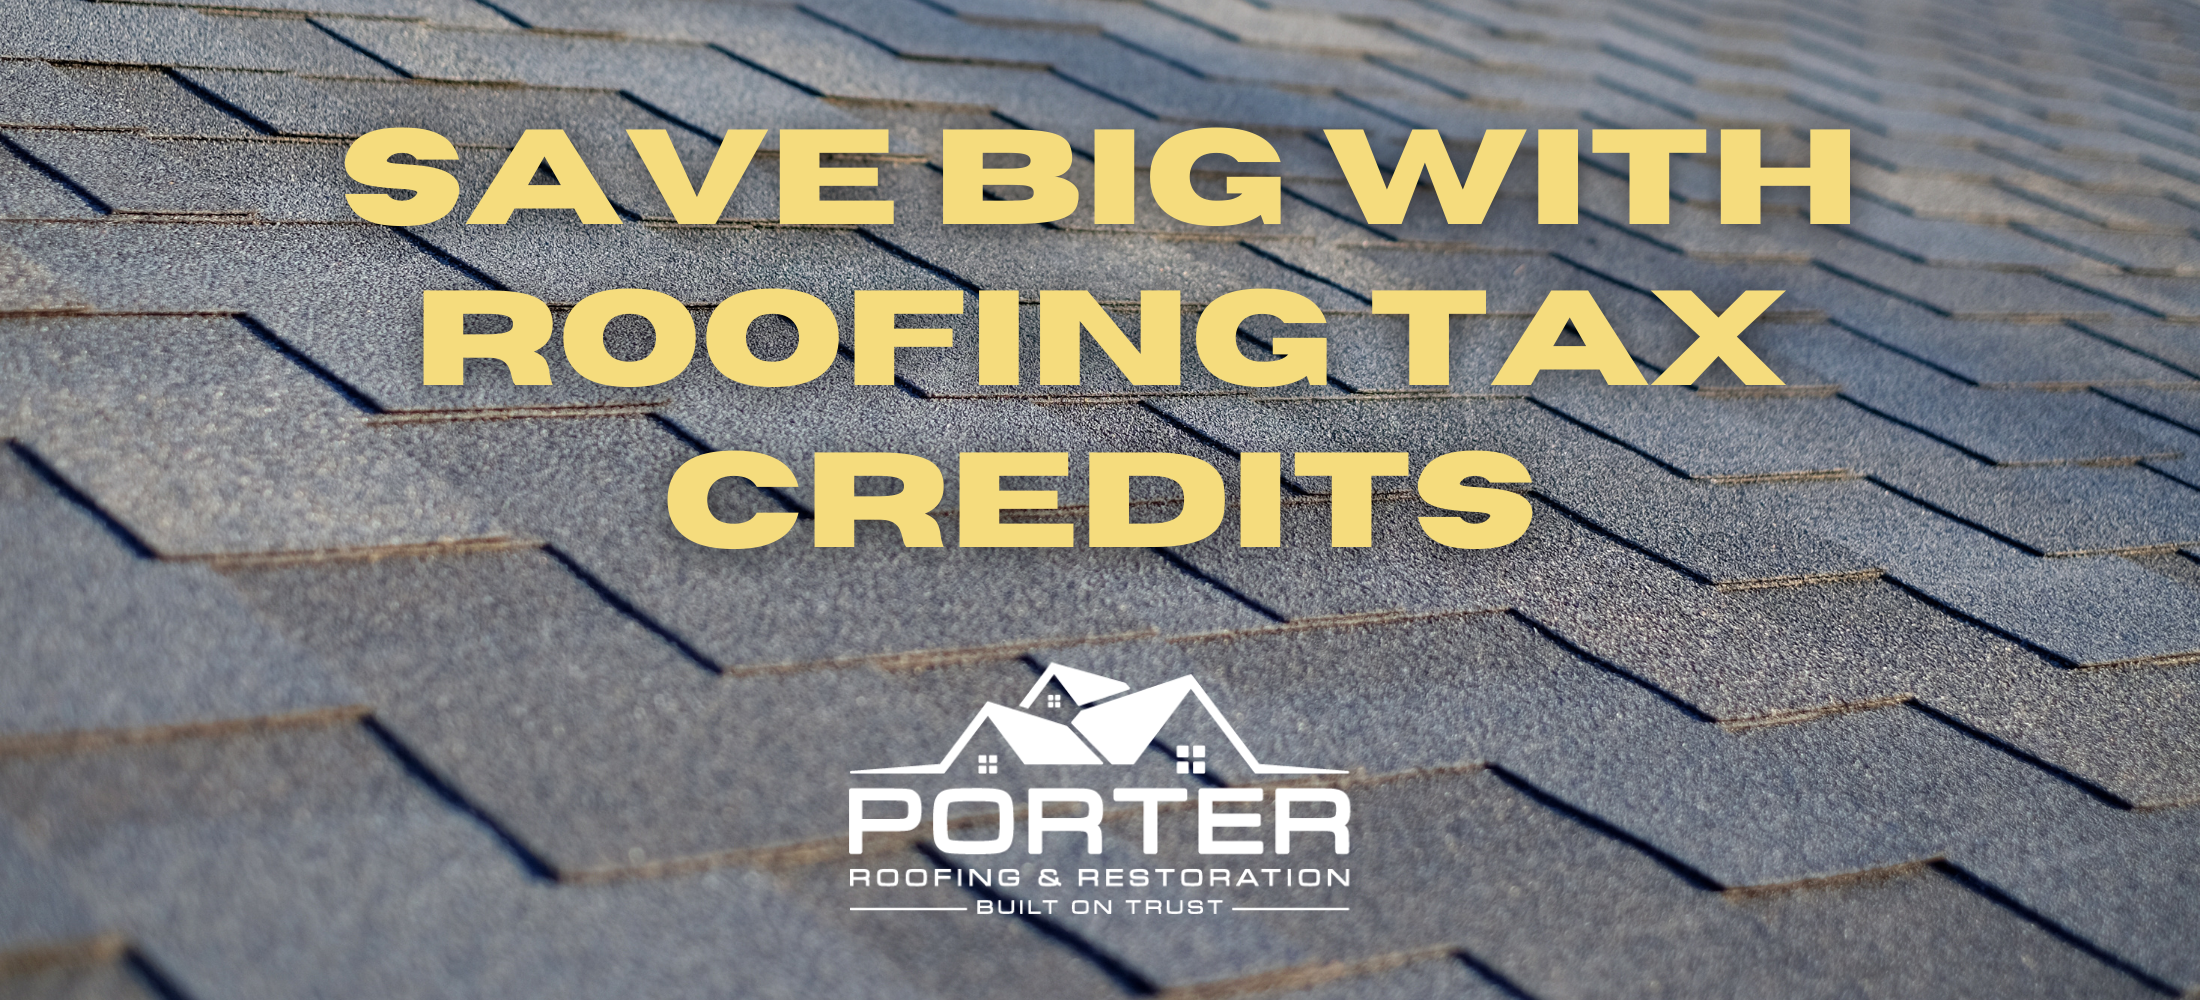 Roofing Tax Credits